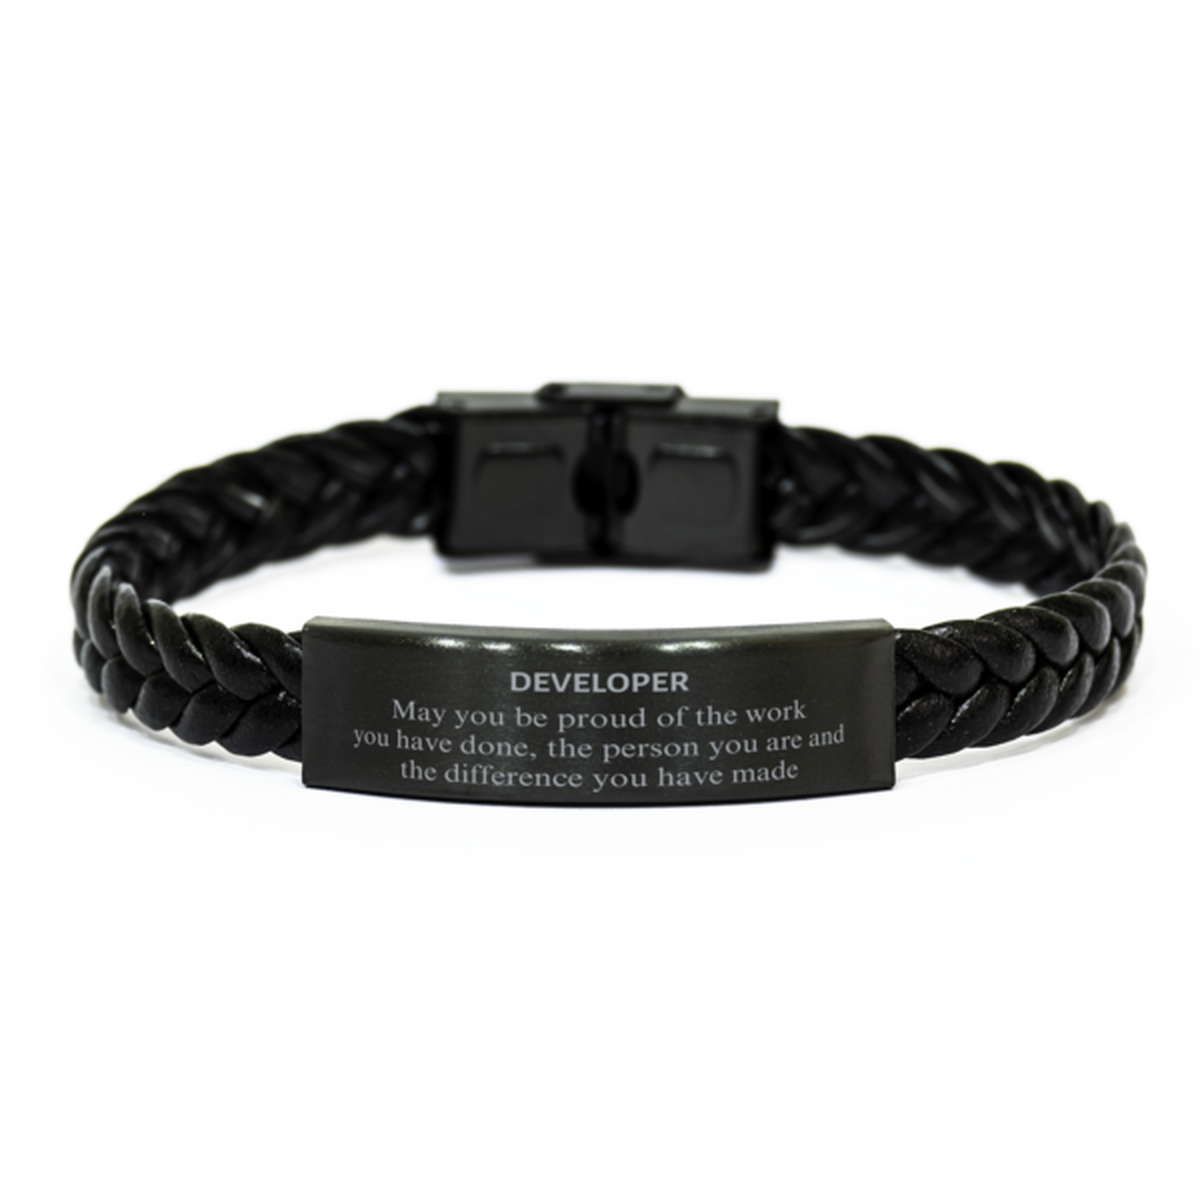 Developer May you be proud of the work you have done, Retirement Developer Braided Leather Bracelet for Colleague Appreciation Gifts Amazing for Developer